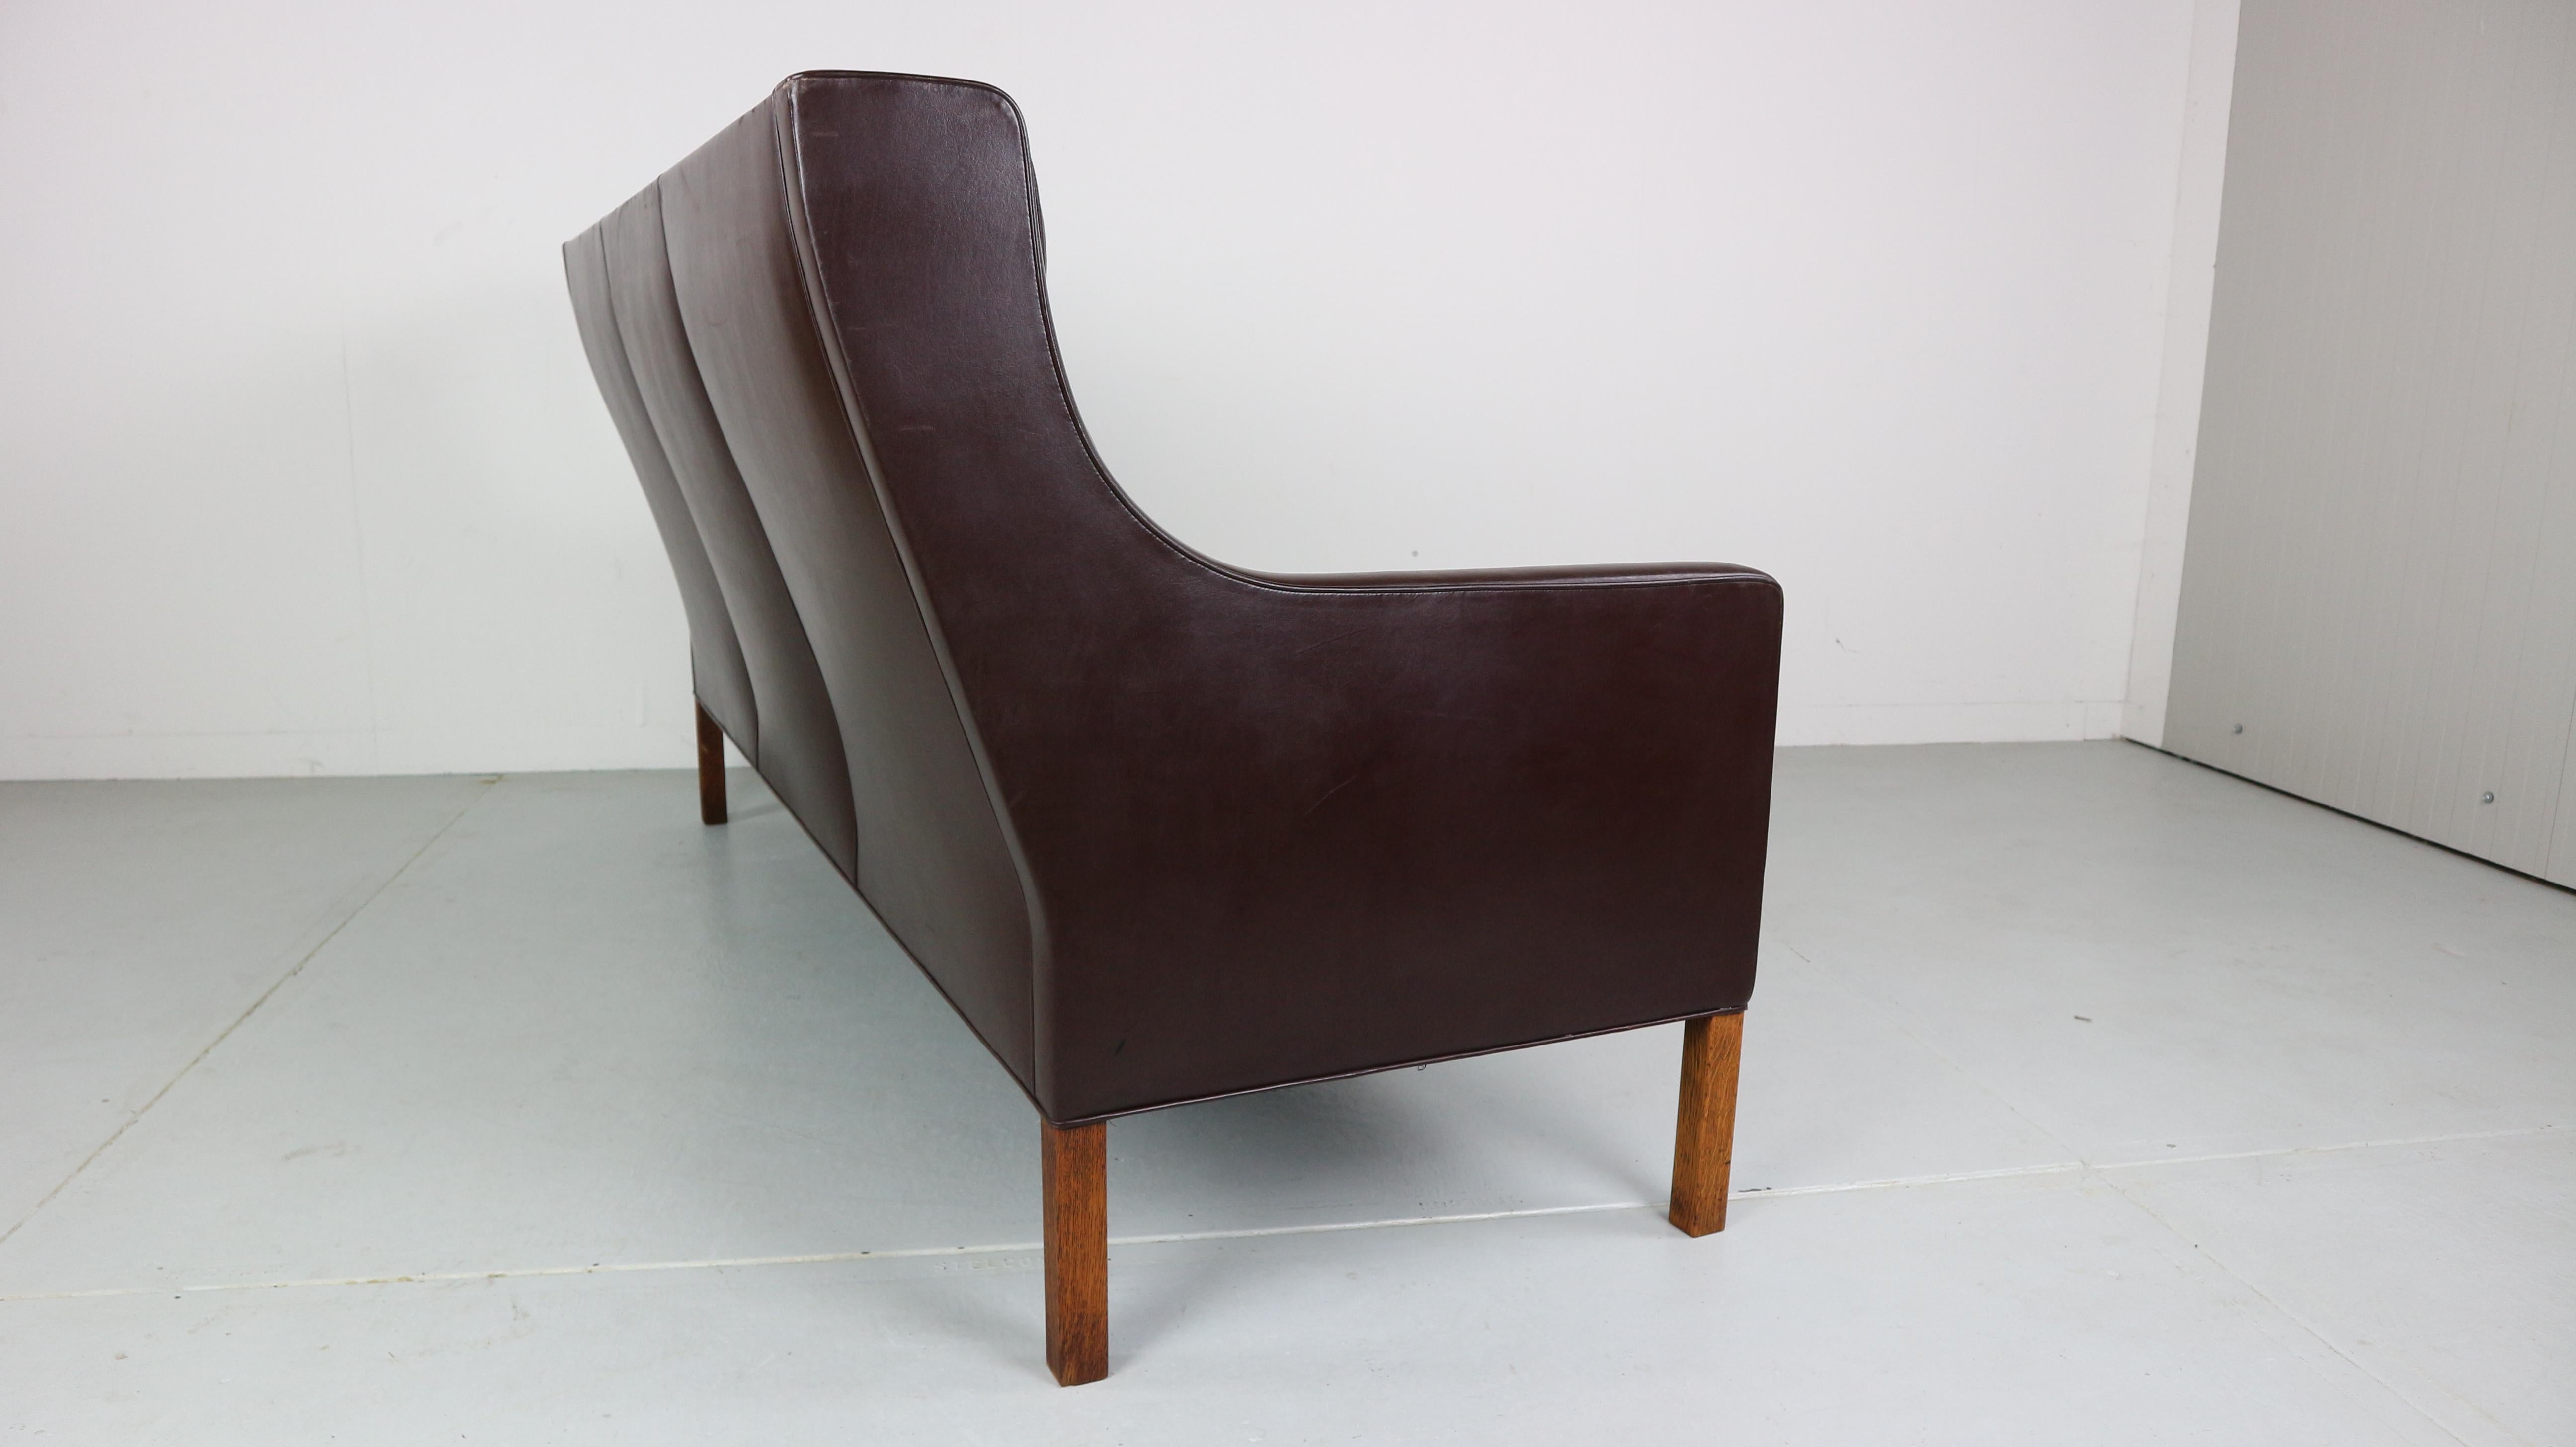 Mid-20th Century Three-Seat Leather Sofa 2433 by Børge Mogensen for Fredericia Furniture